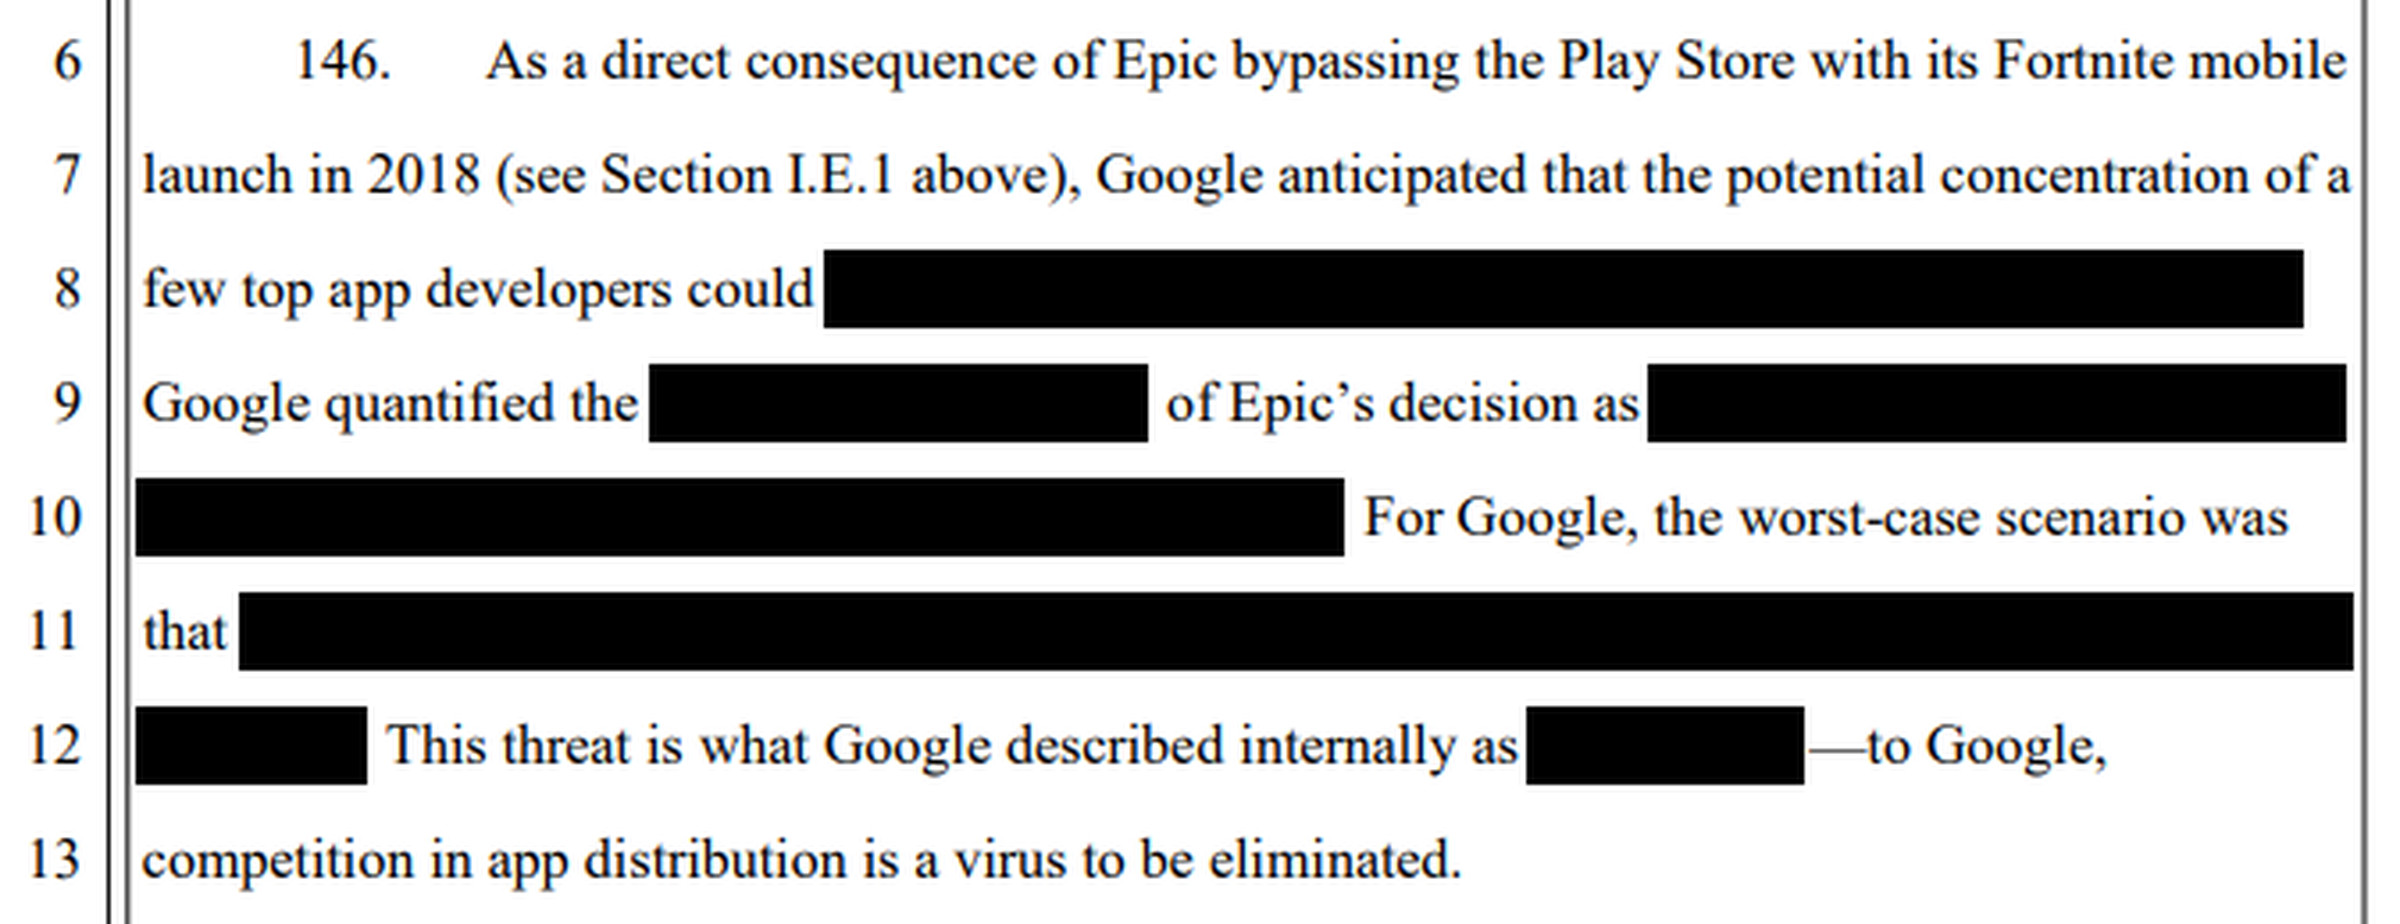 Google’s response to Epic distributing Fortnite outside its app store.